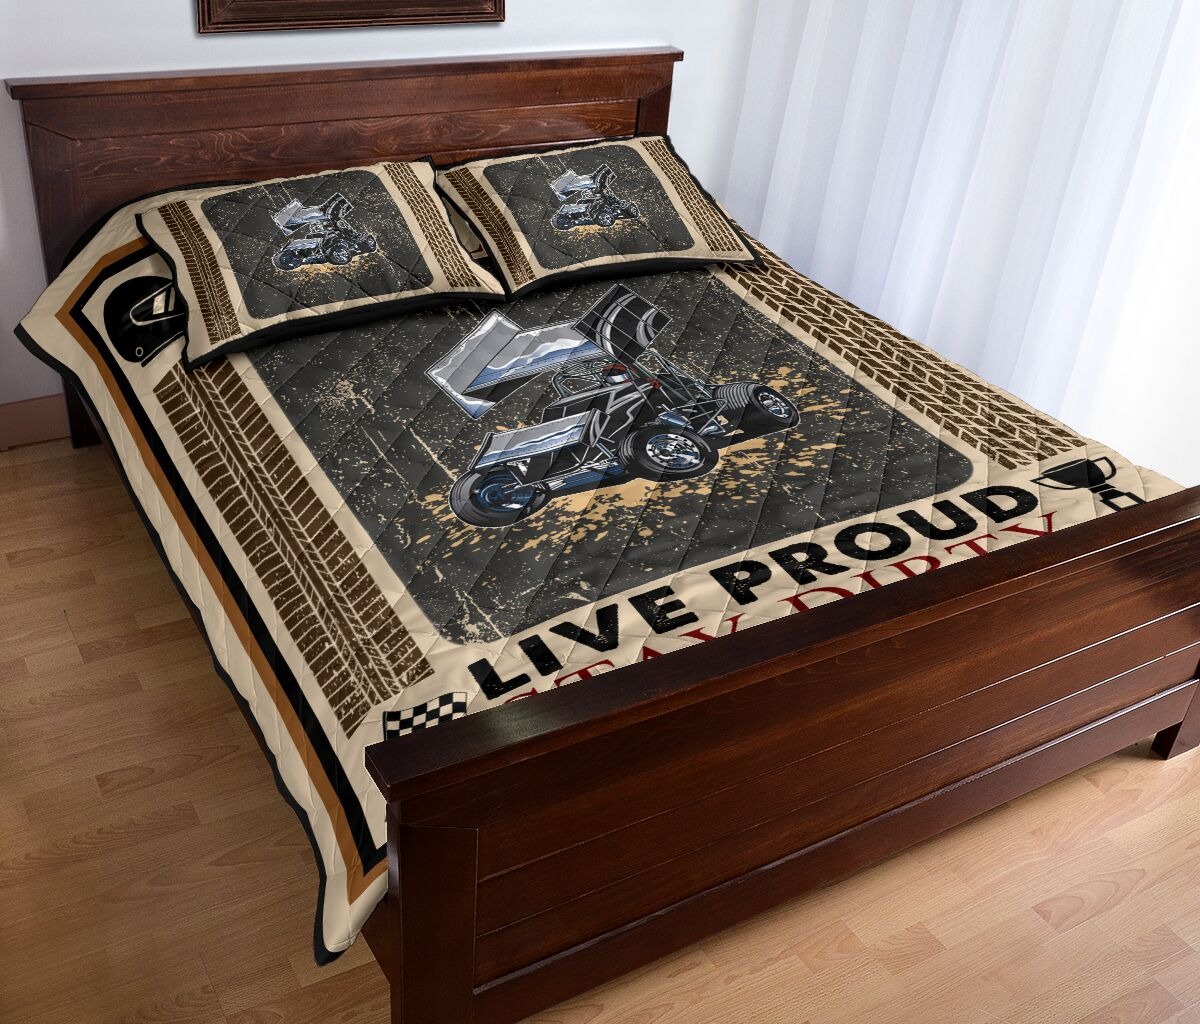 Car racing Live fast live loud live proud stay dirty bedding set2